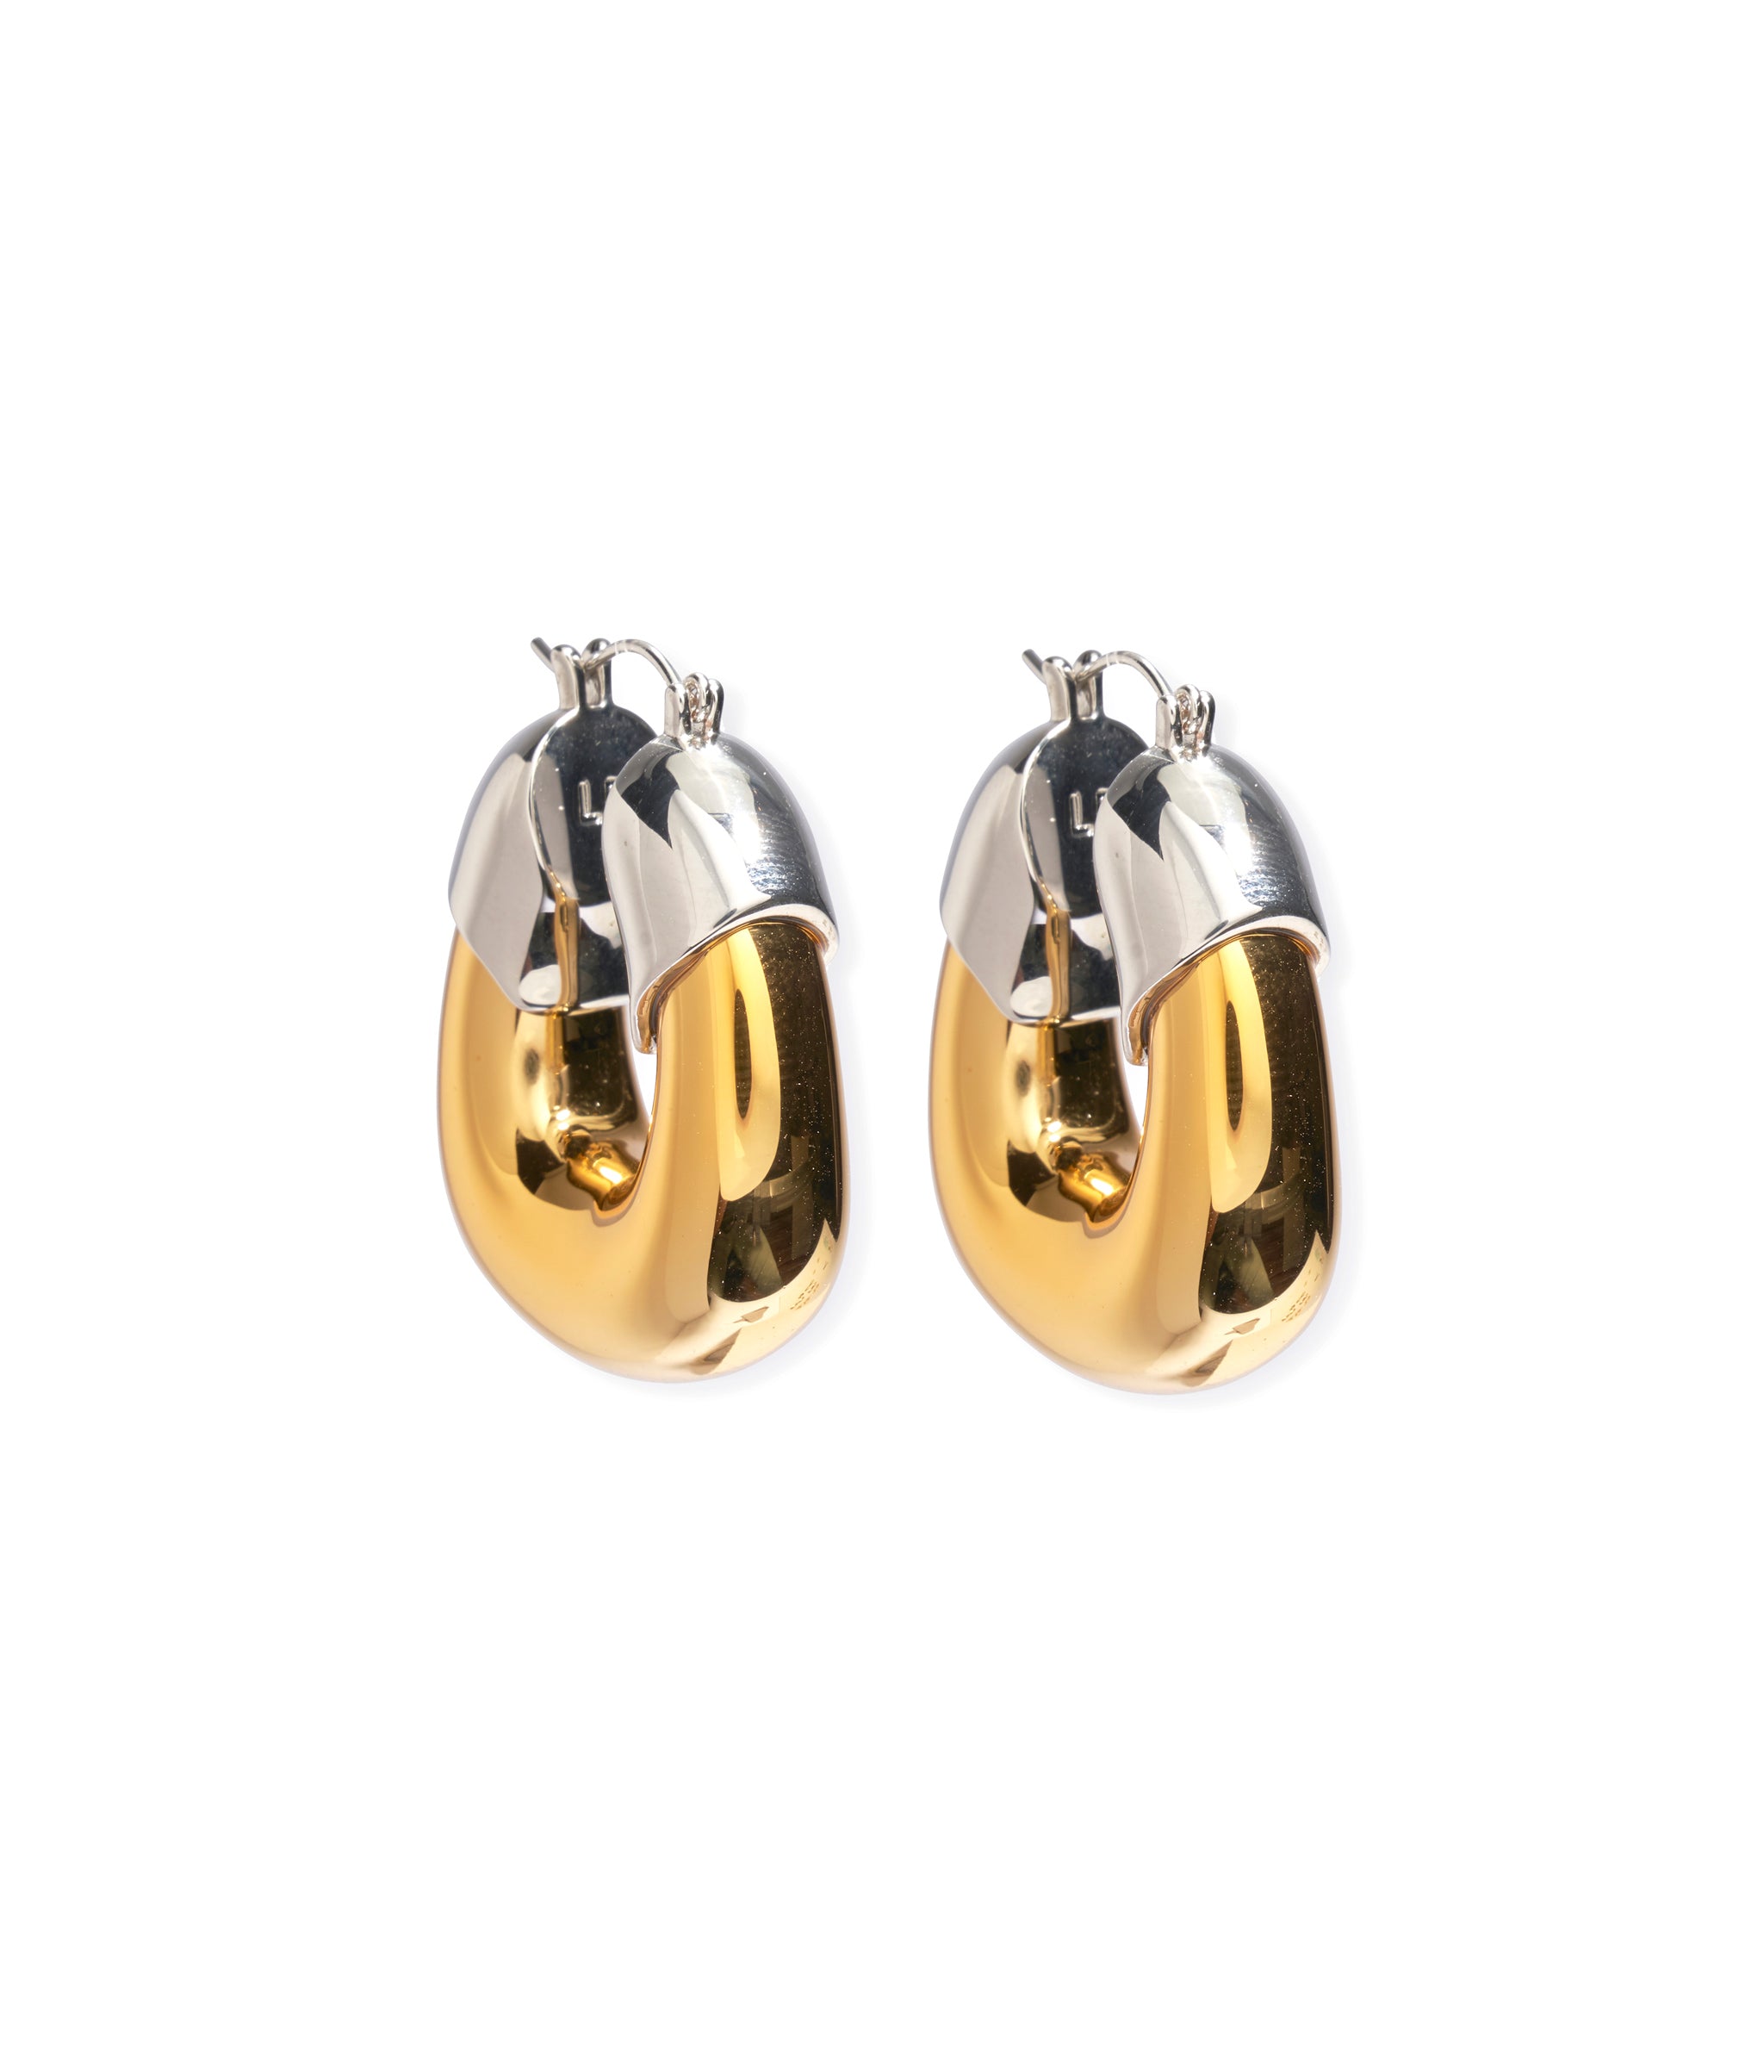 Organic Hoops in Mixed Metal. Chunky gold-plated hoop earrings with shiny silver tops.